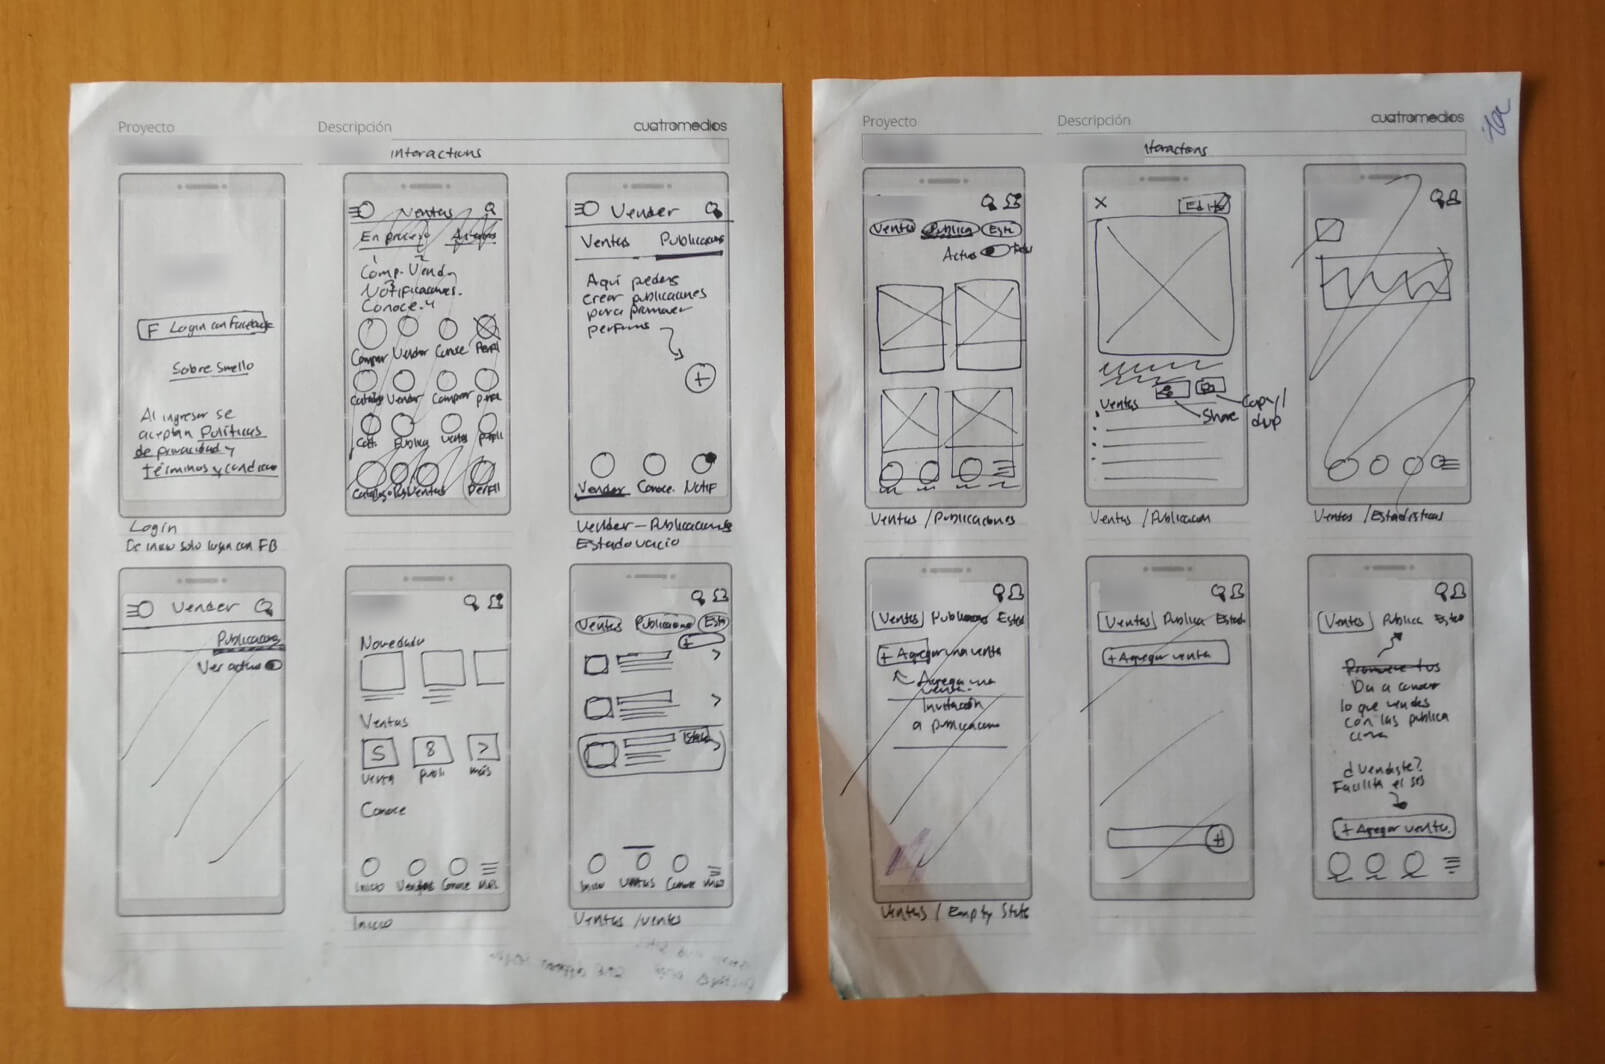 Sketches of a user interface